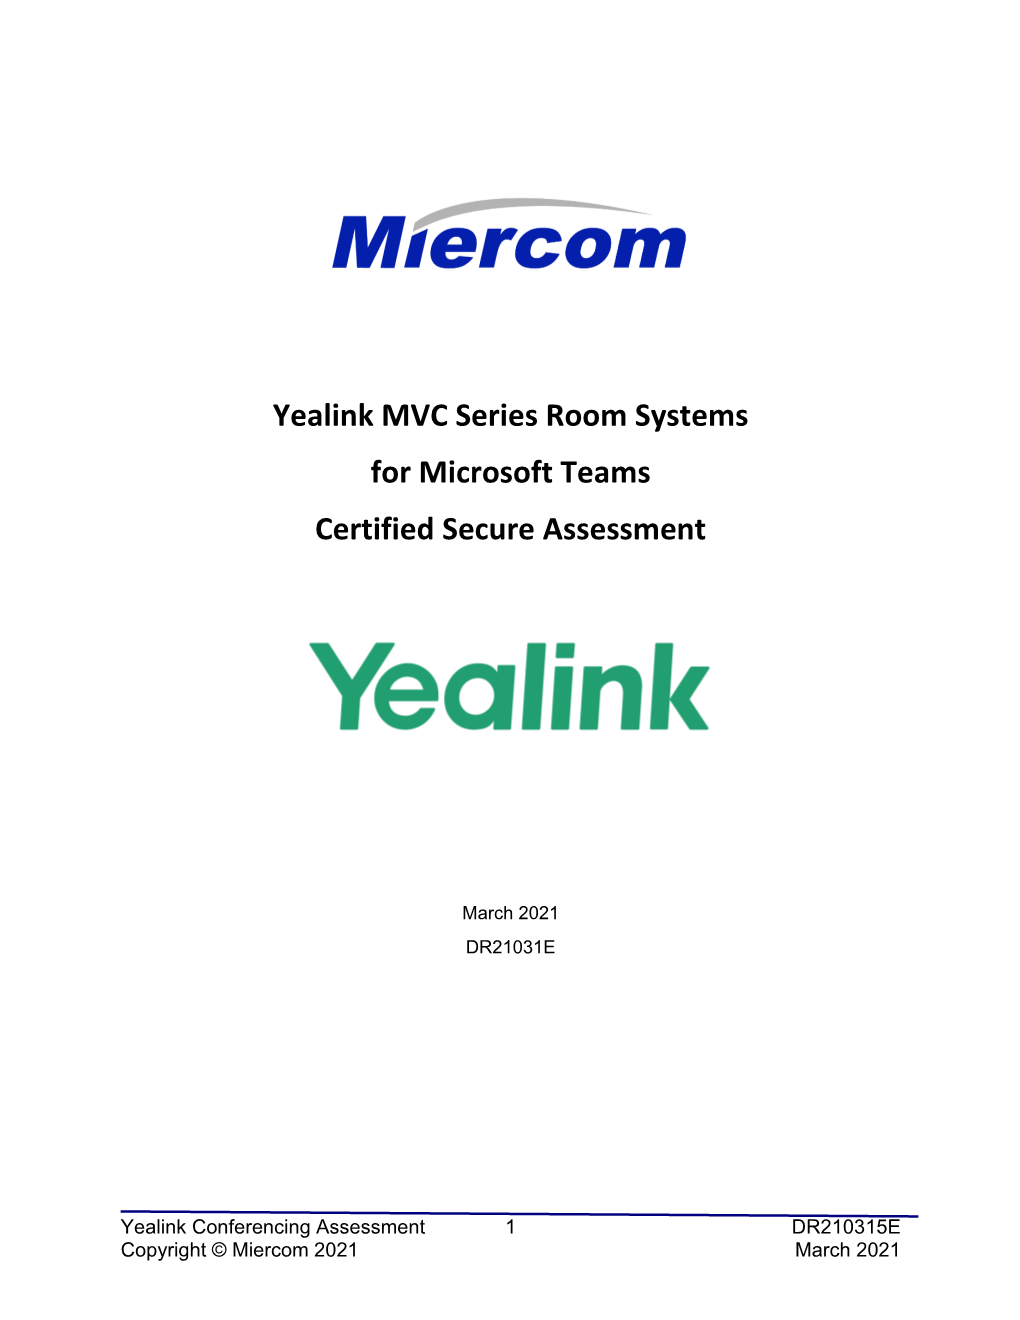 Yealink MVC Series Room Systems for Microsoft Teams Certified Secure Assessment